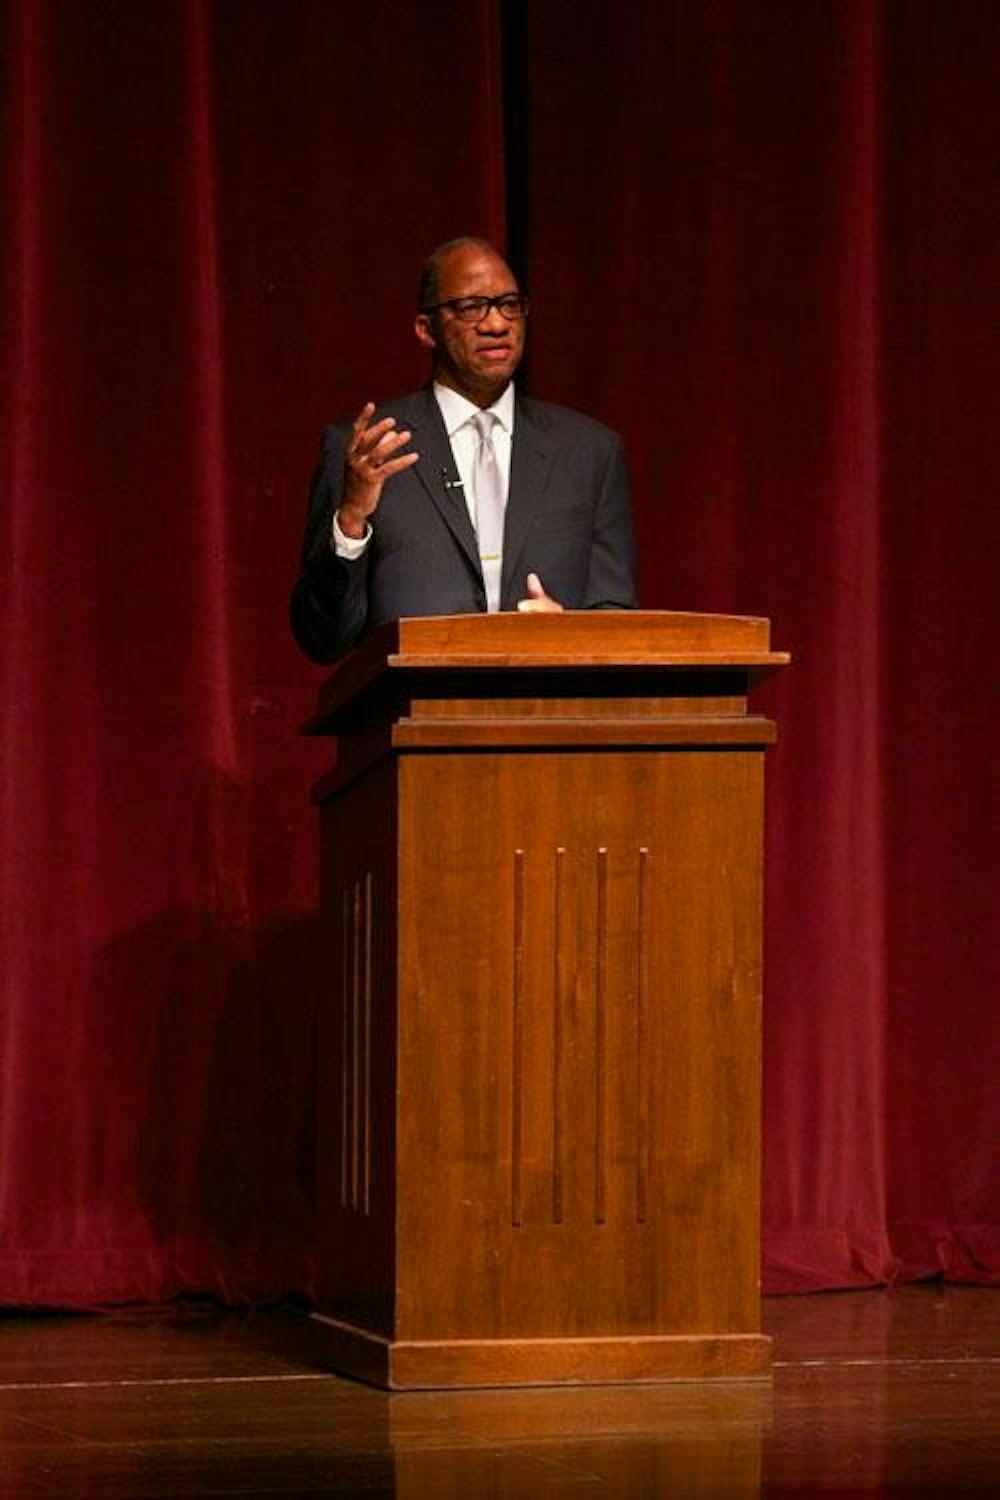 Miami University ‘76 alum Wil Haygood spoke Tuesday at Hall Auditorium about the “Hot Summer of 1964.”